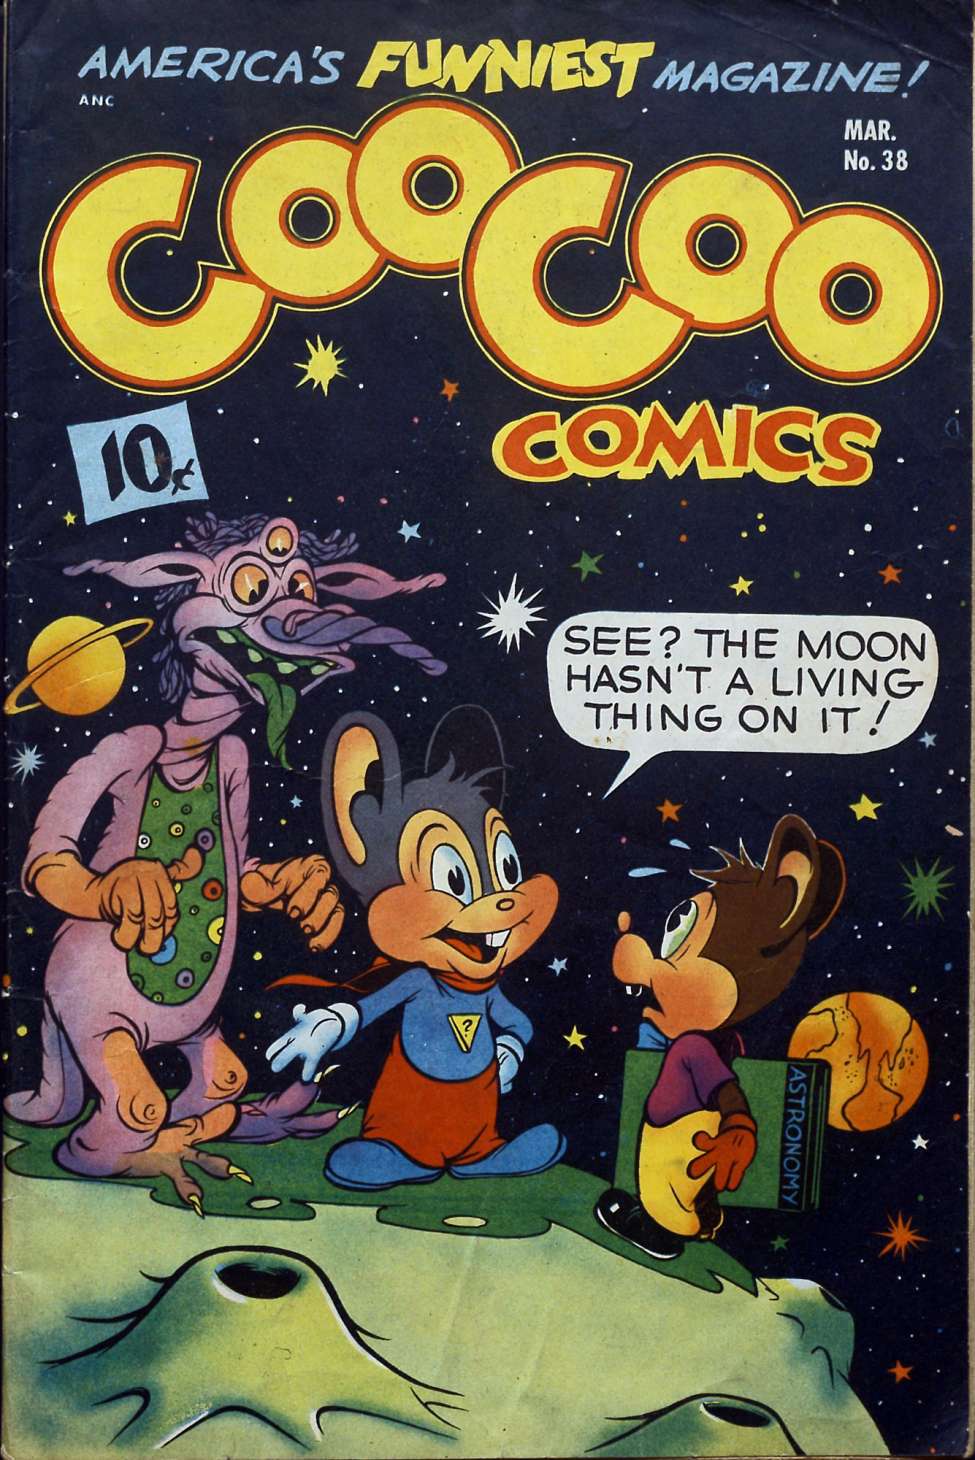 Book Cover For Coo Coo Comics 38